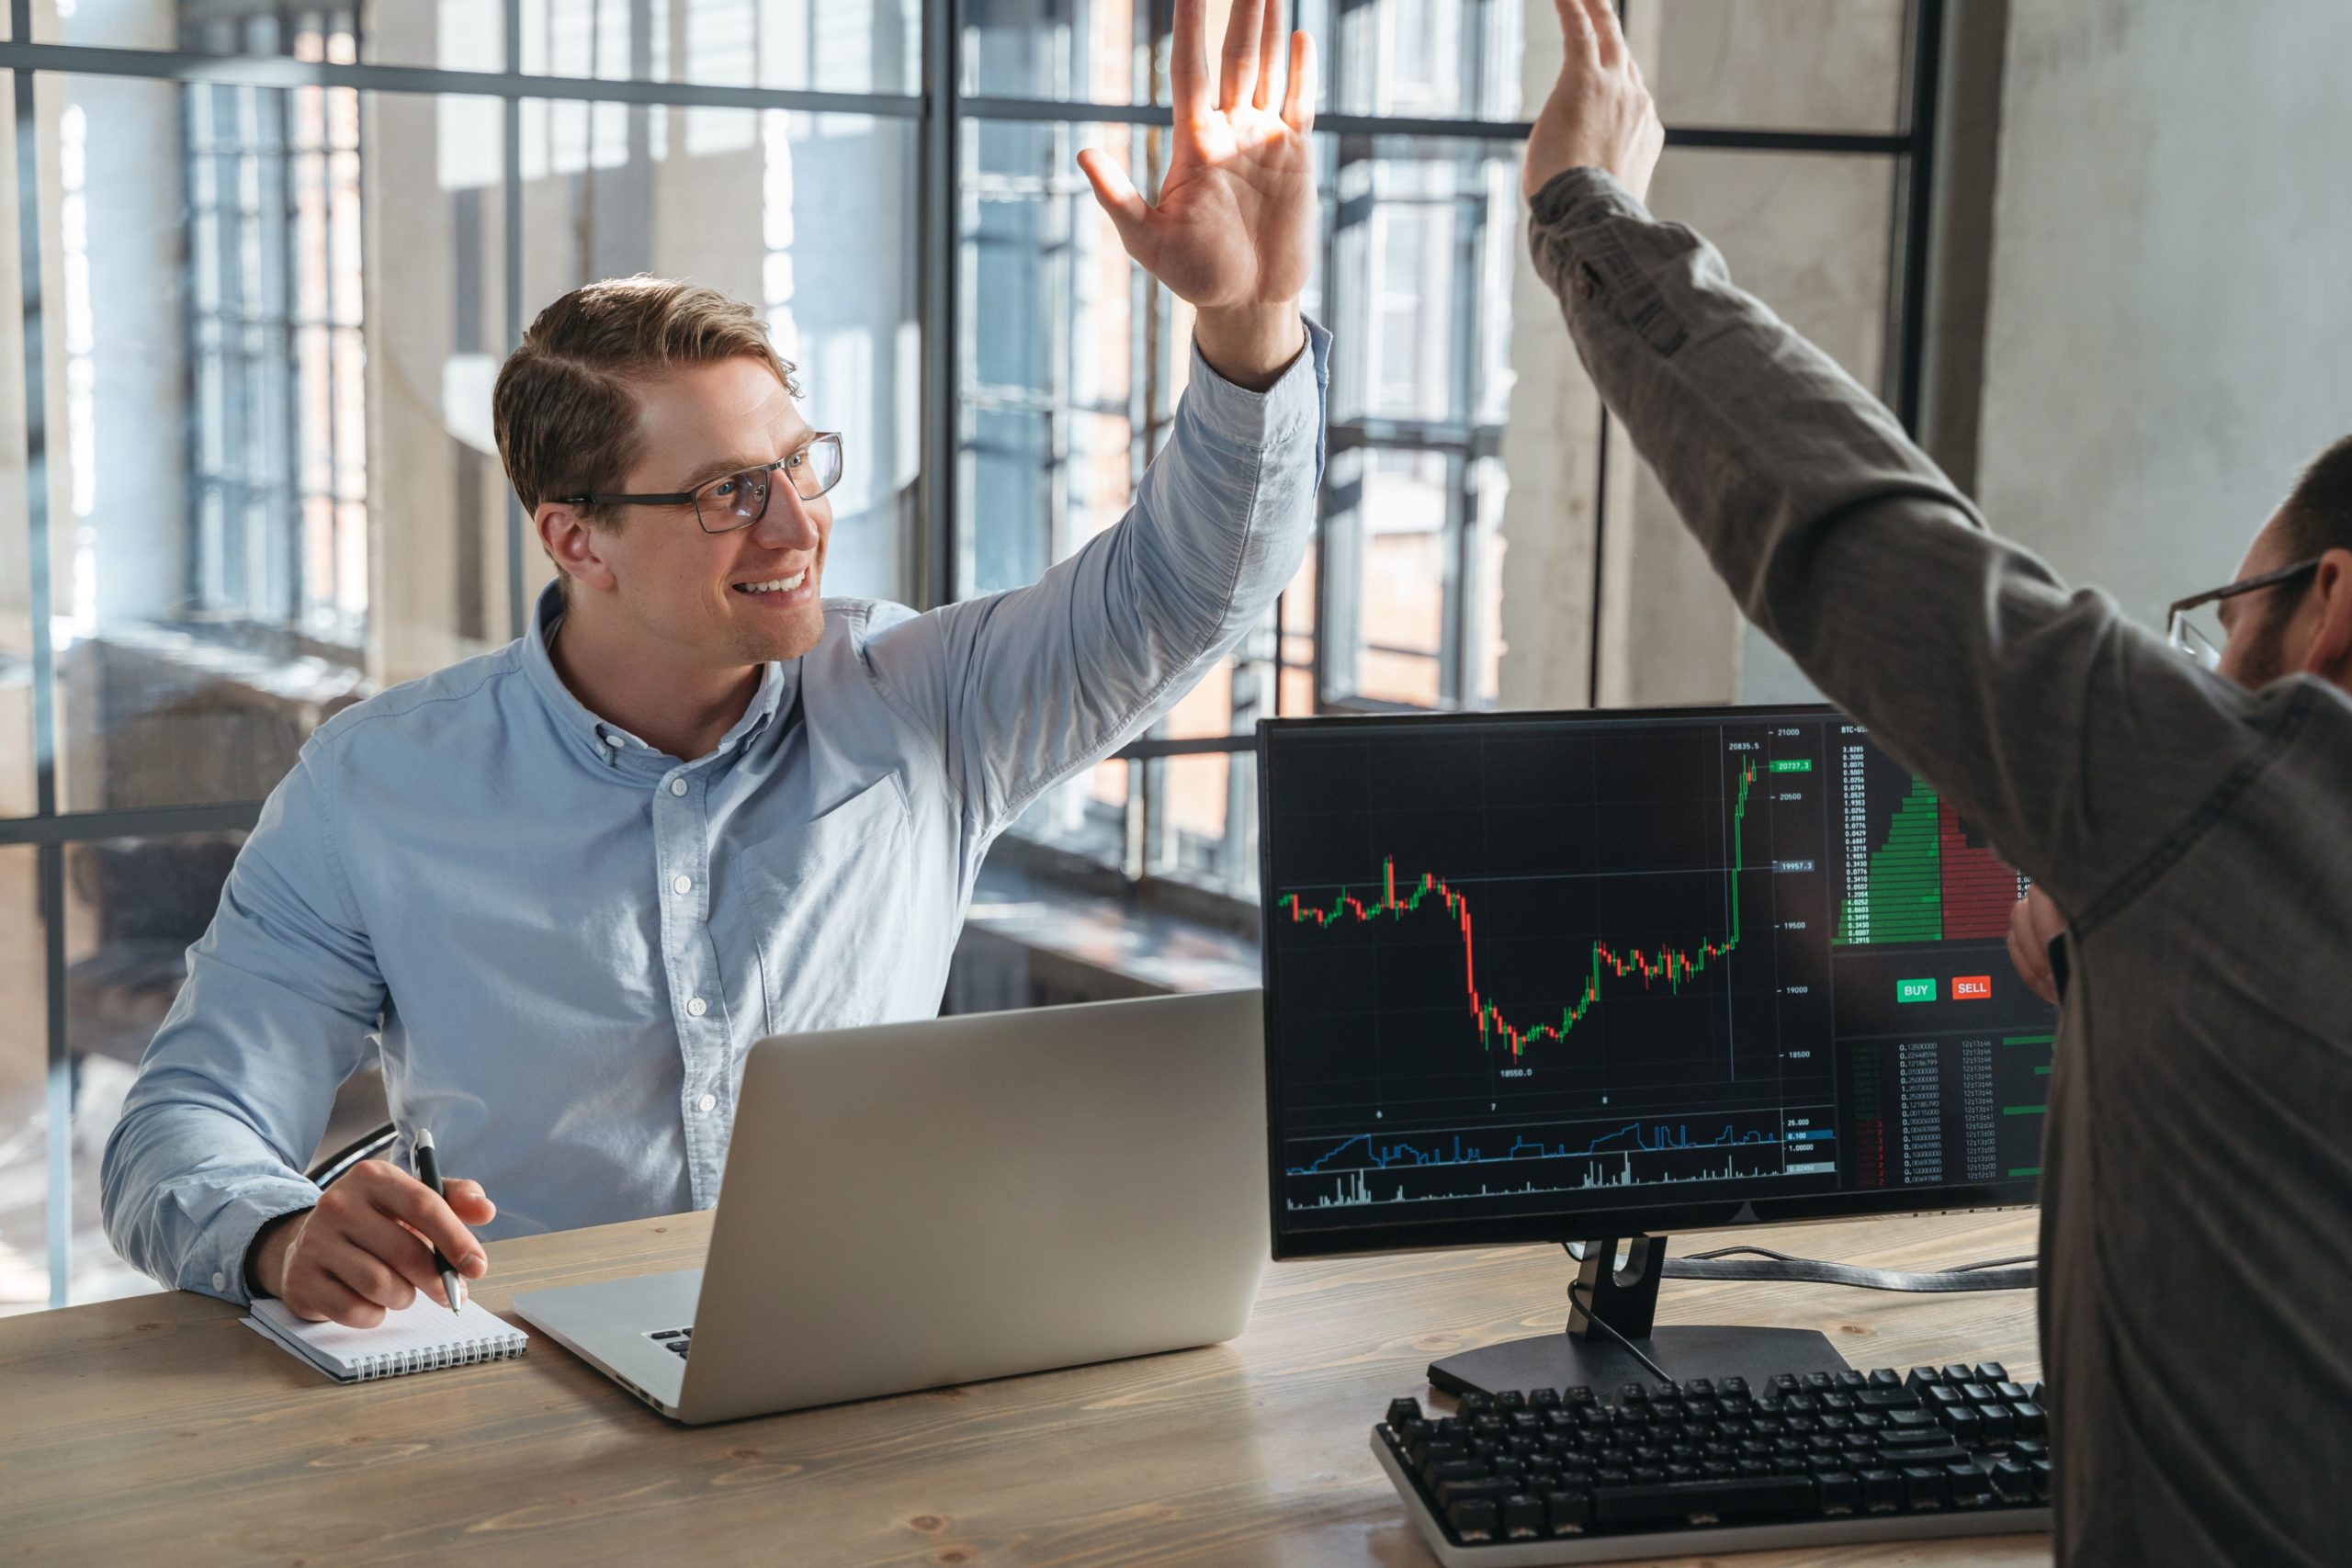 Two partners trade investors giving high five to each other after fulfilling good deal, buying crypto currency at stock market at low price, sitting opposite each other in front of computers